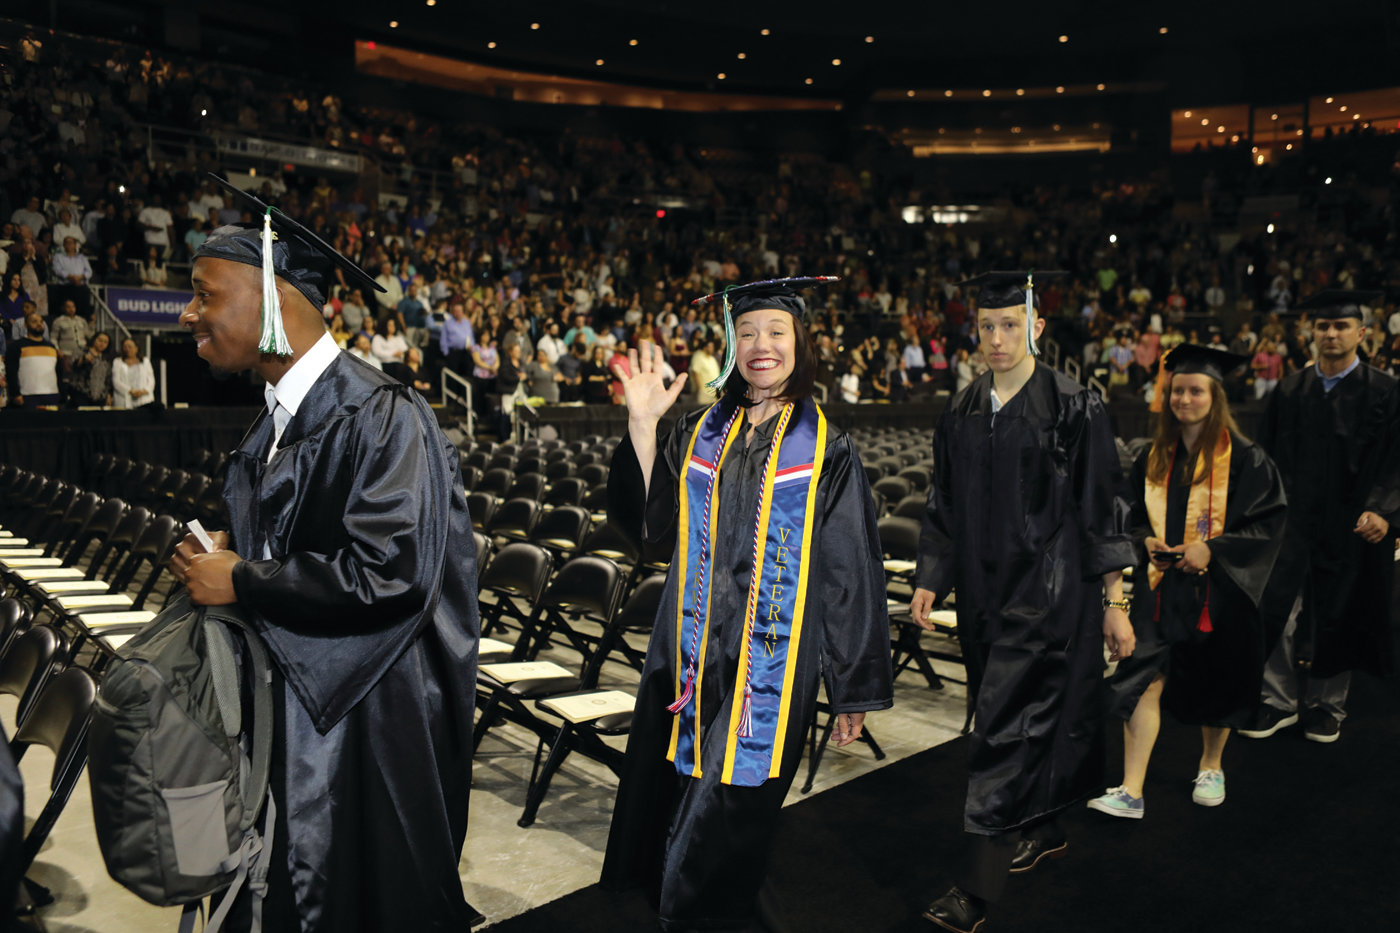 REASON TO SMILE: CCRI graduates proceed into the Dunkin’ Donuts Center before receiving their degrees during the college’s 54th commencement ceremony.